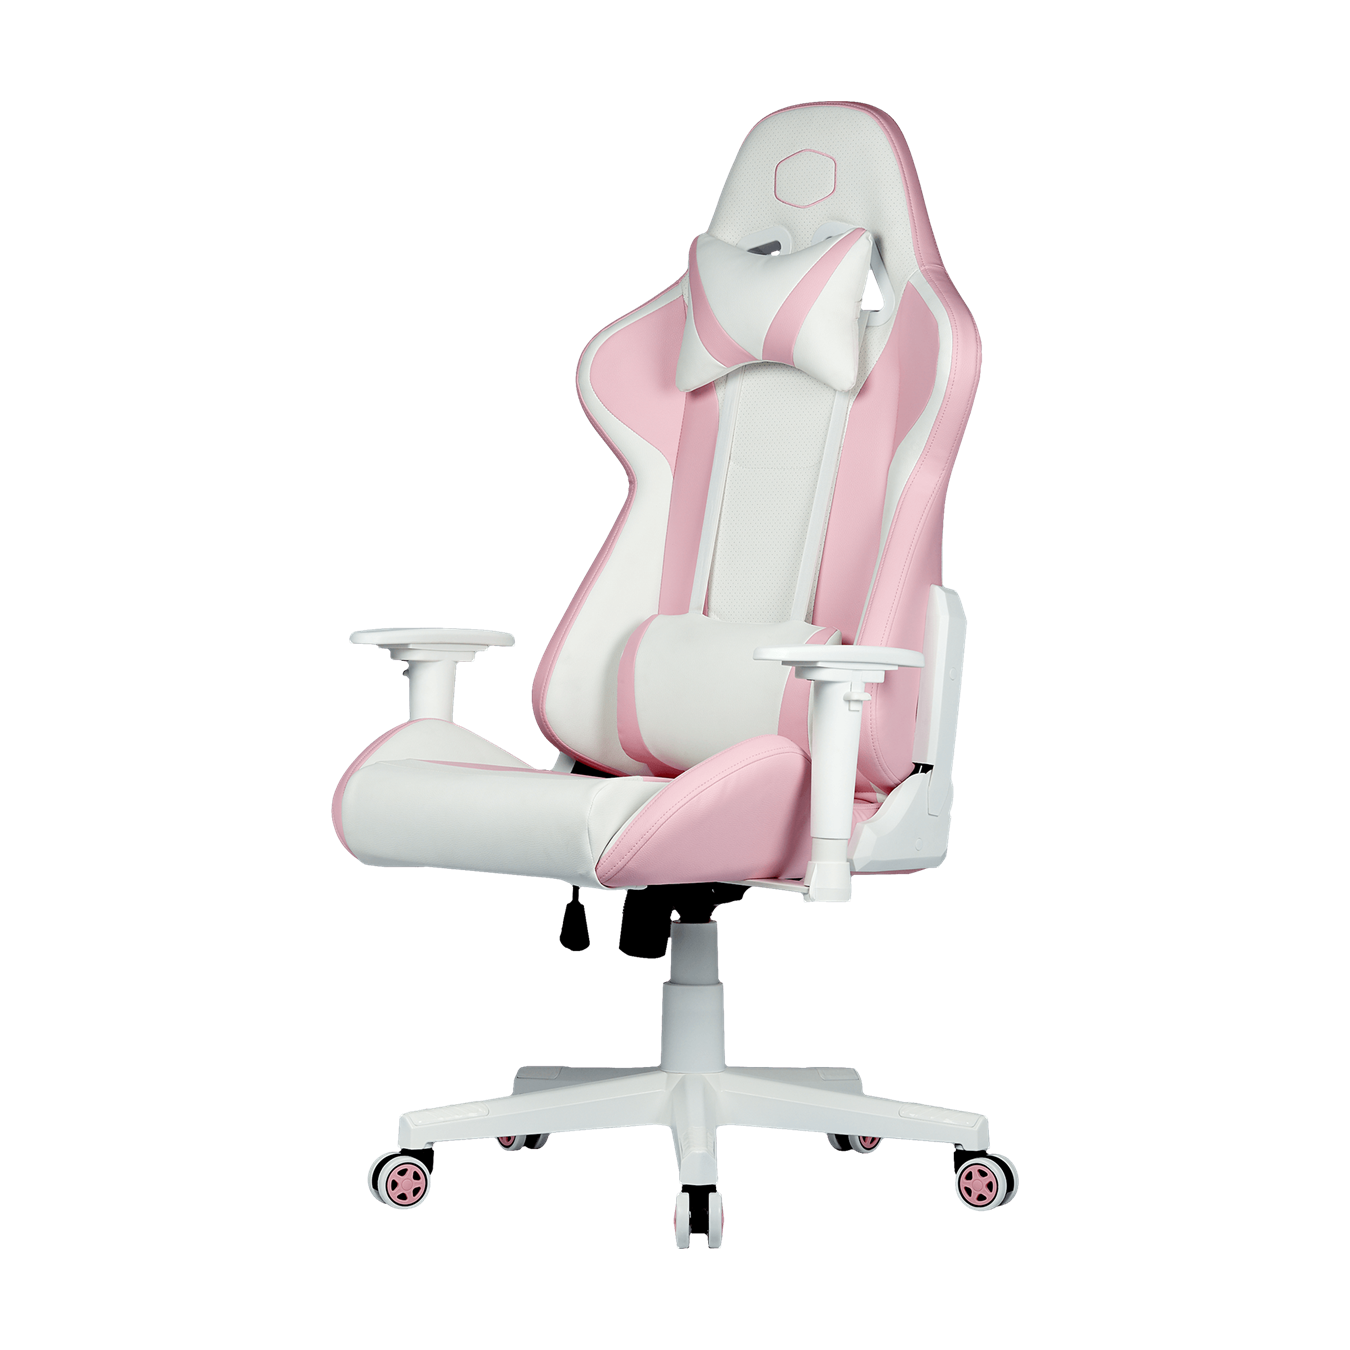 Caliber R1S Rose White Edition Gaming Chair - The headrest and lumbar pillow will provide you with the best level of comfort to reduce back pain and alleviate neck strain.